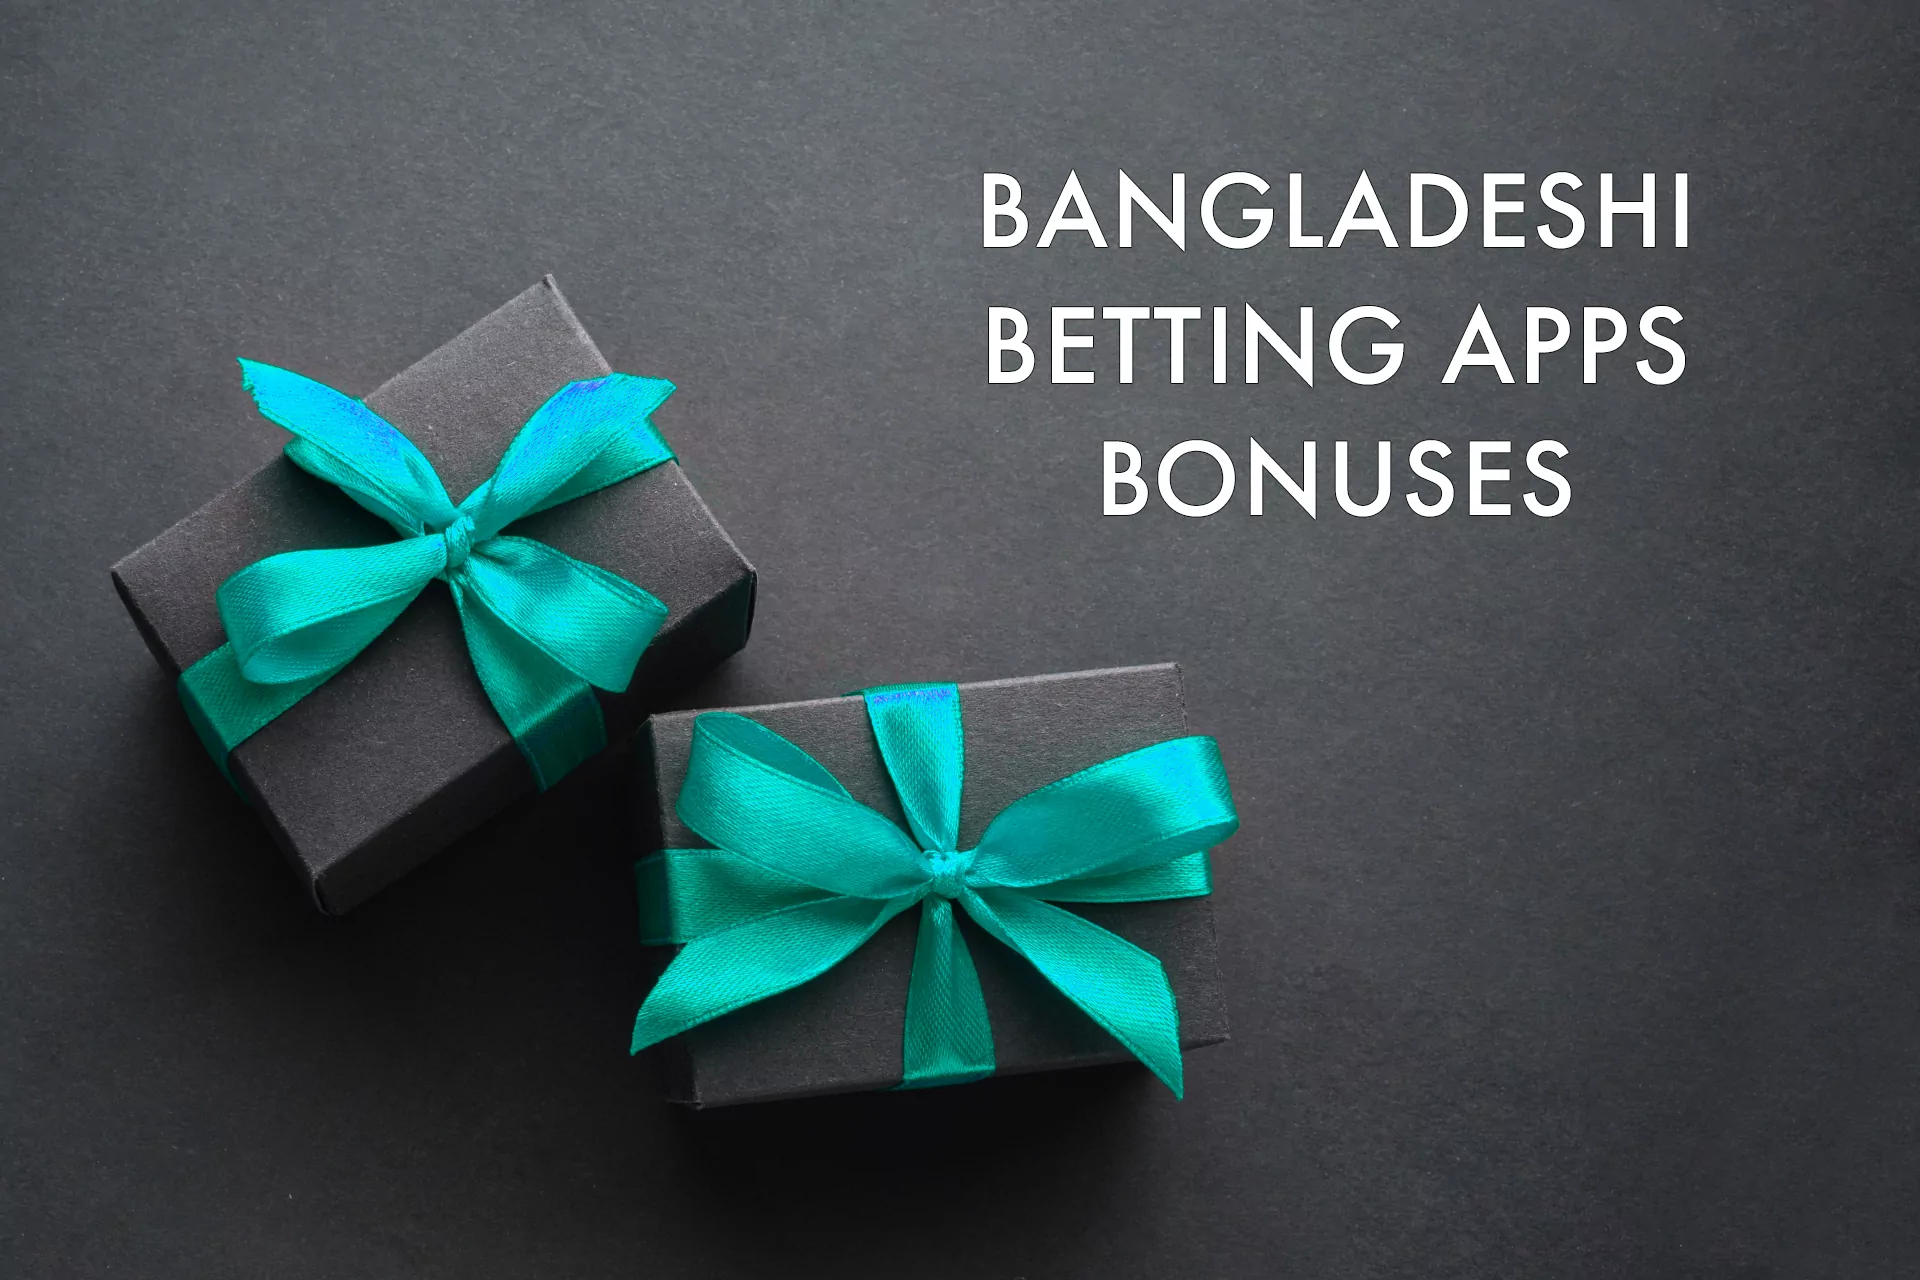 In the betting apps, users from Bangladesh can claim different types of bonuses.